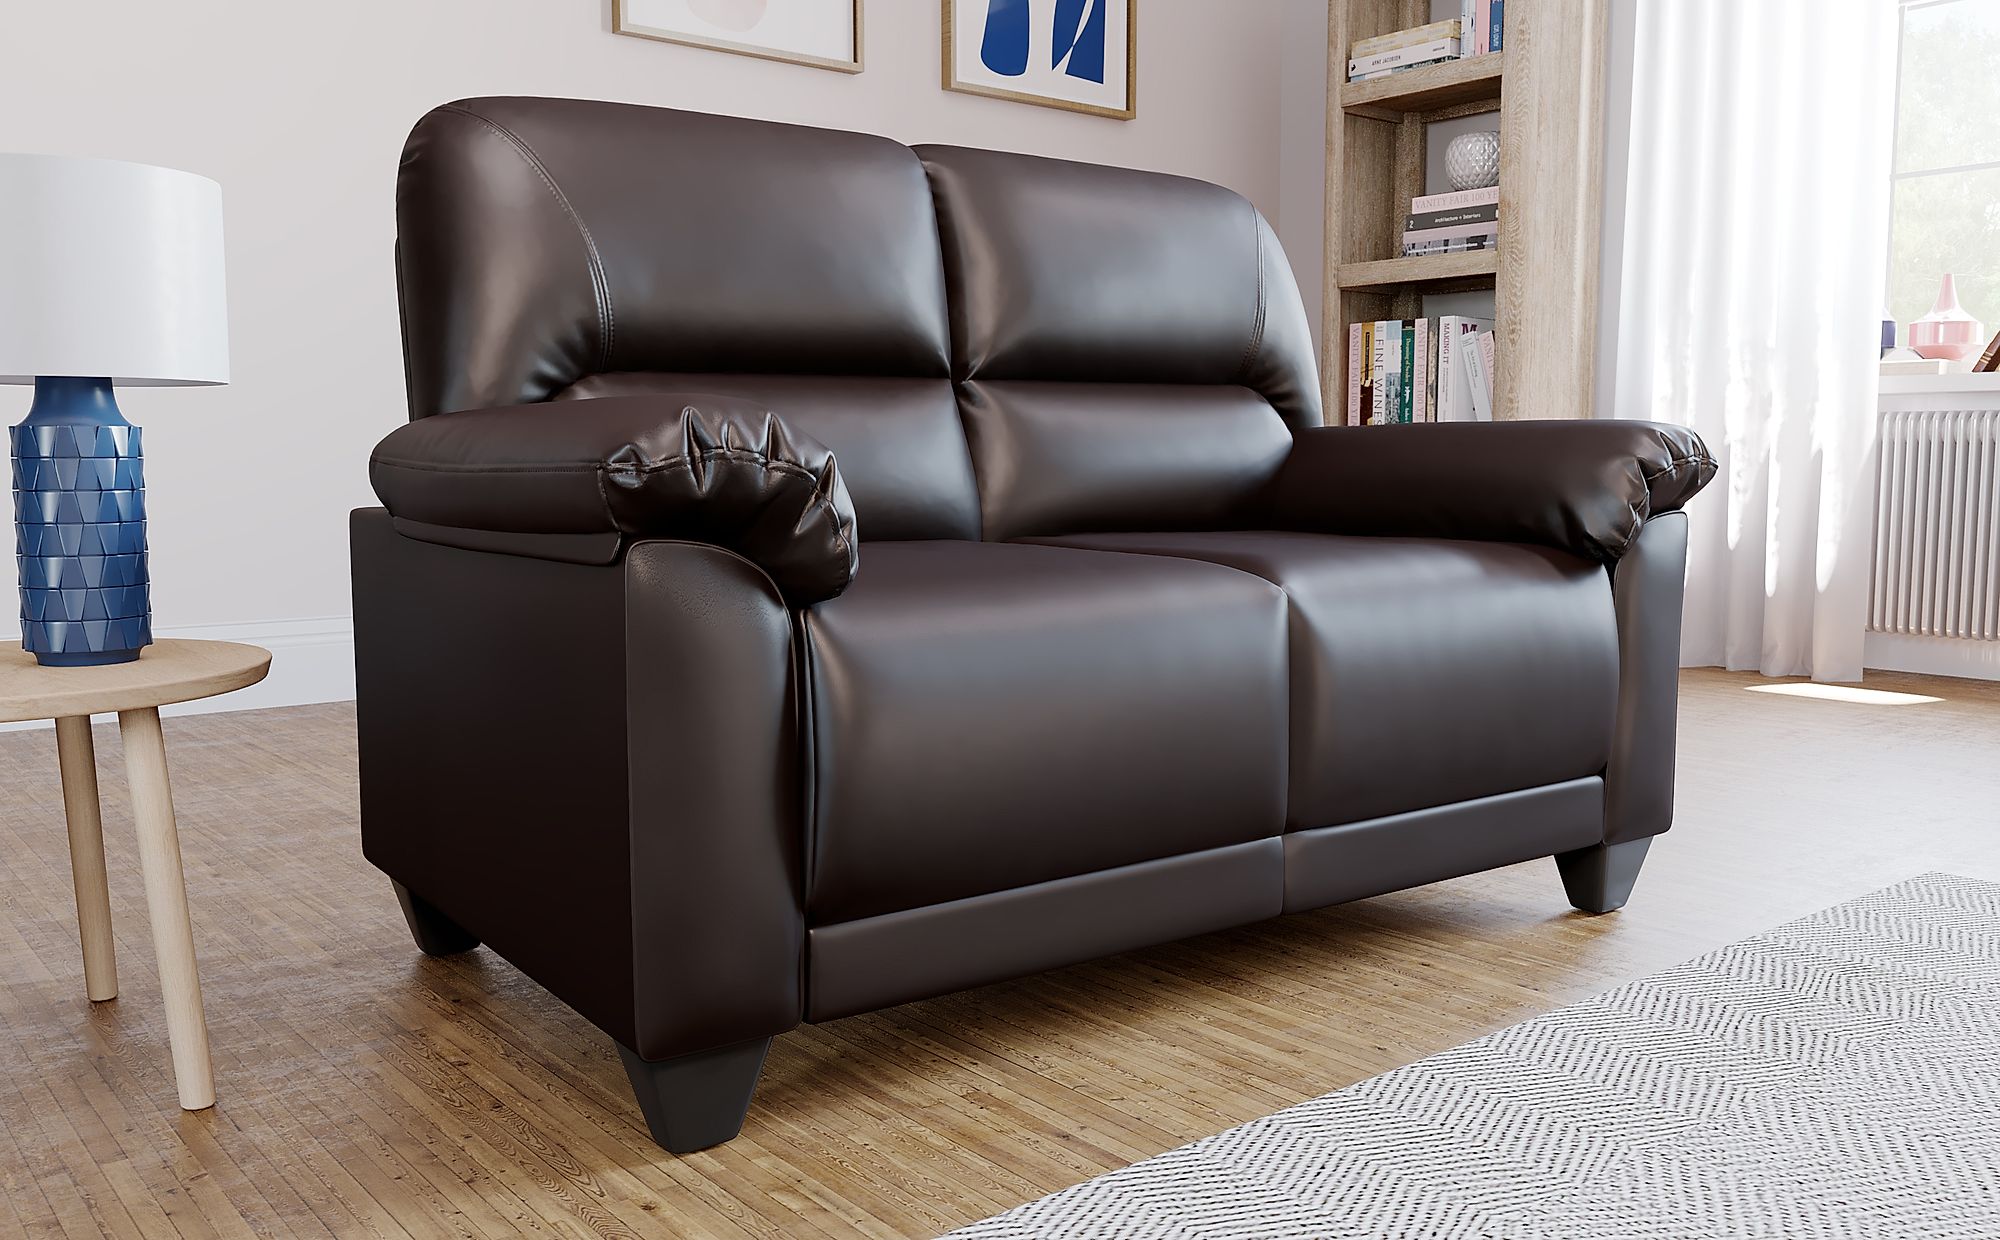 brown leather sofa small room